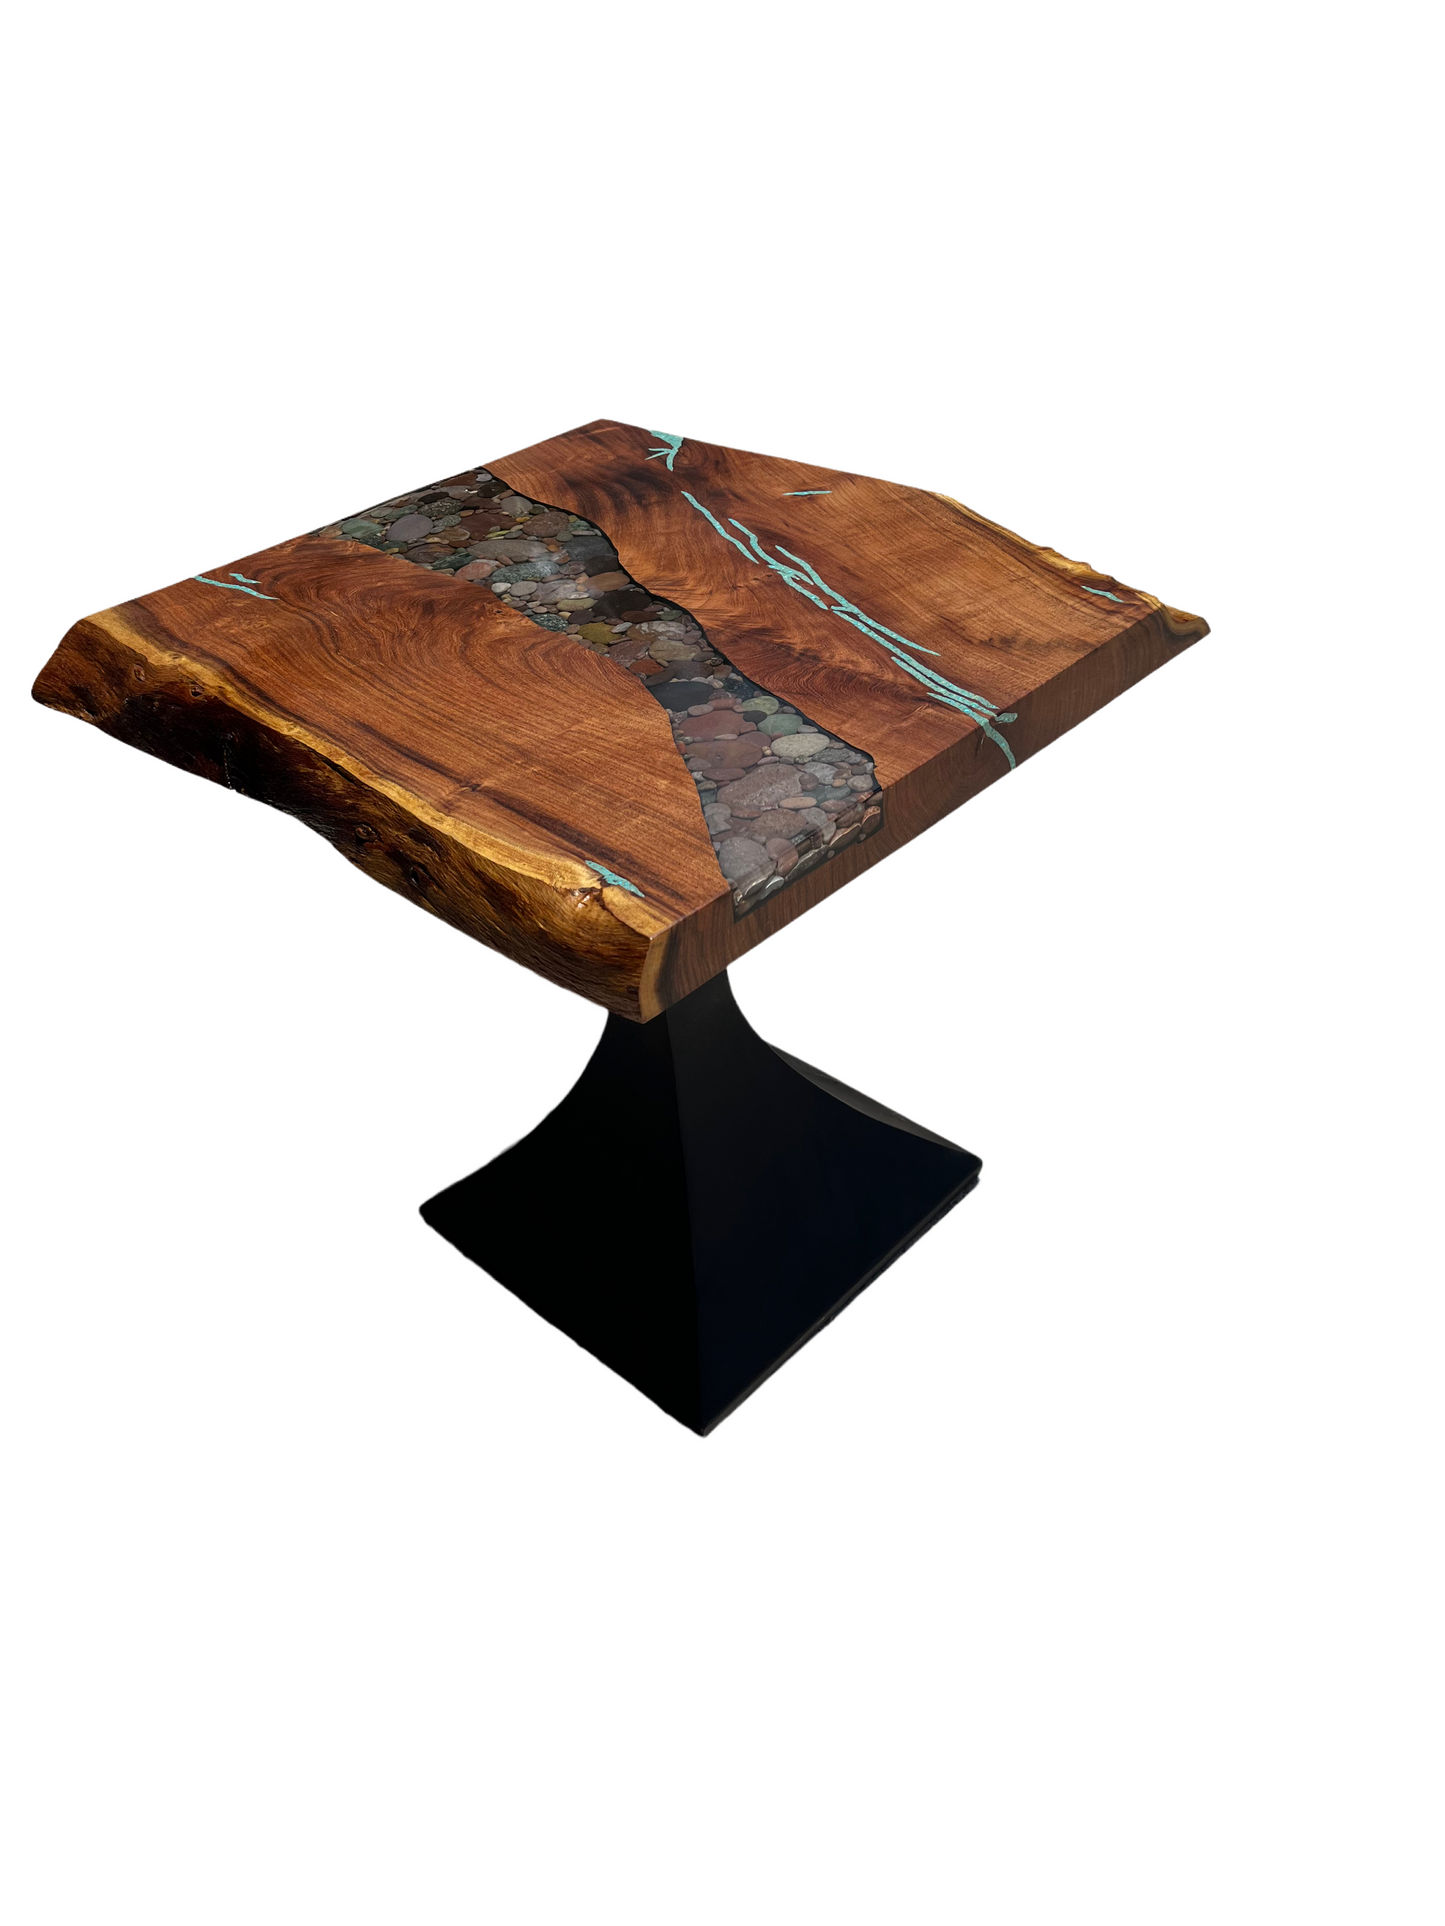 Natural Edge End Table with metal foot, turquoise and river rock inlay